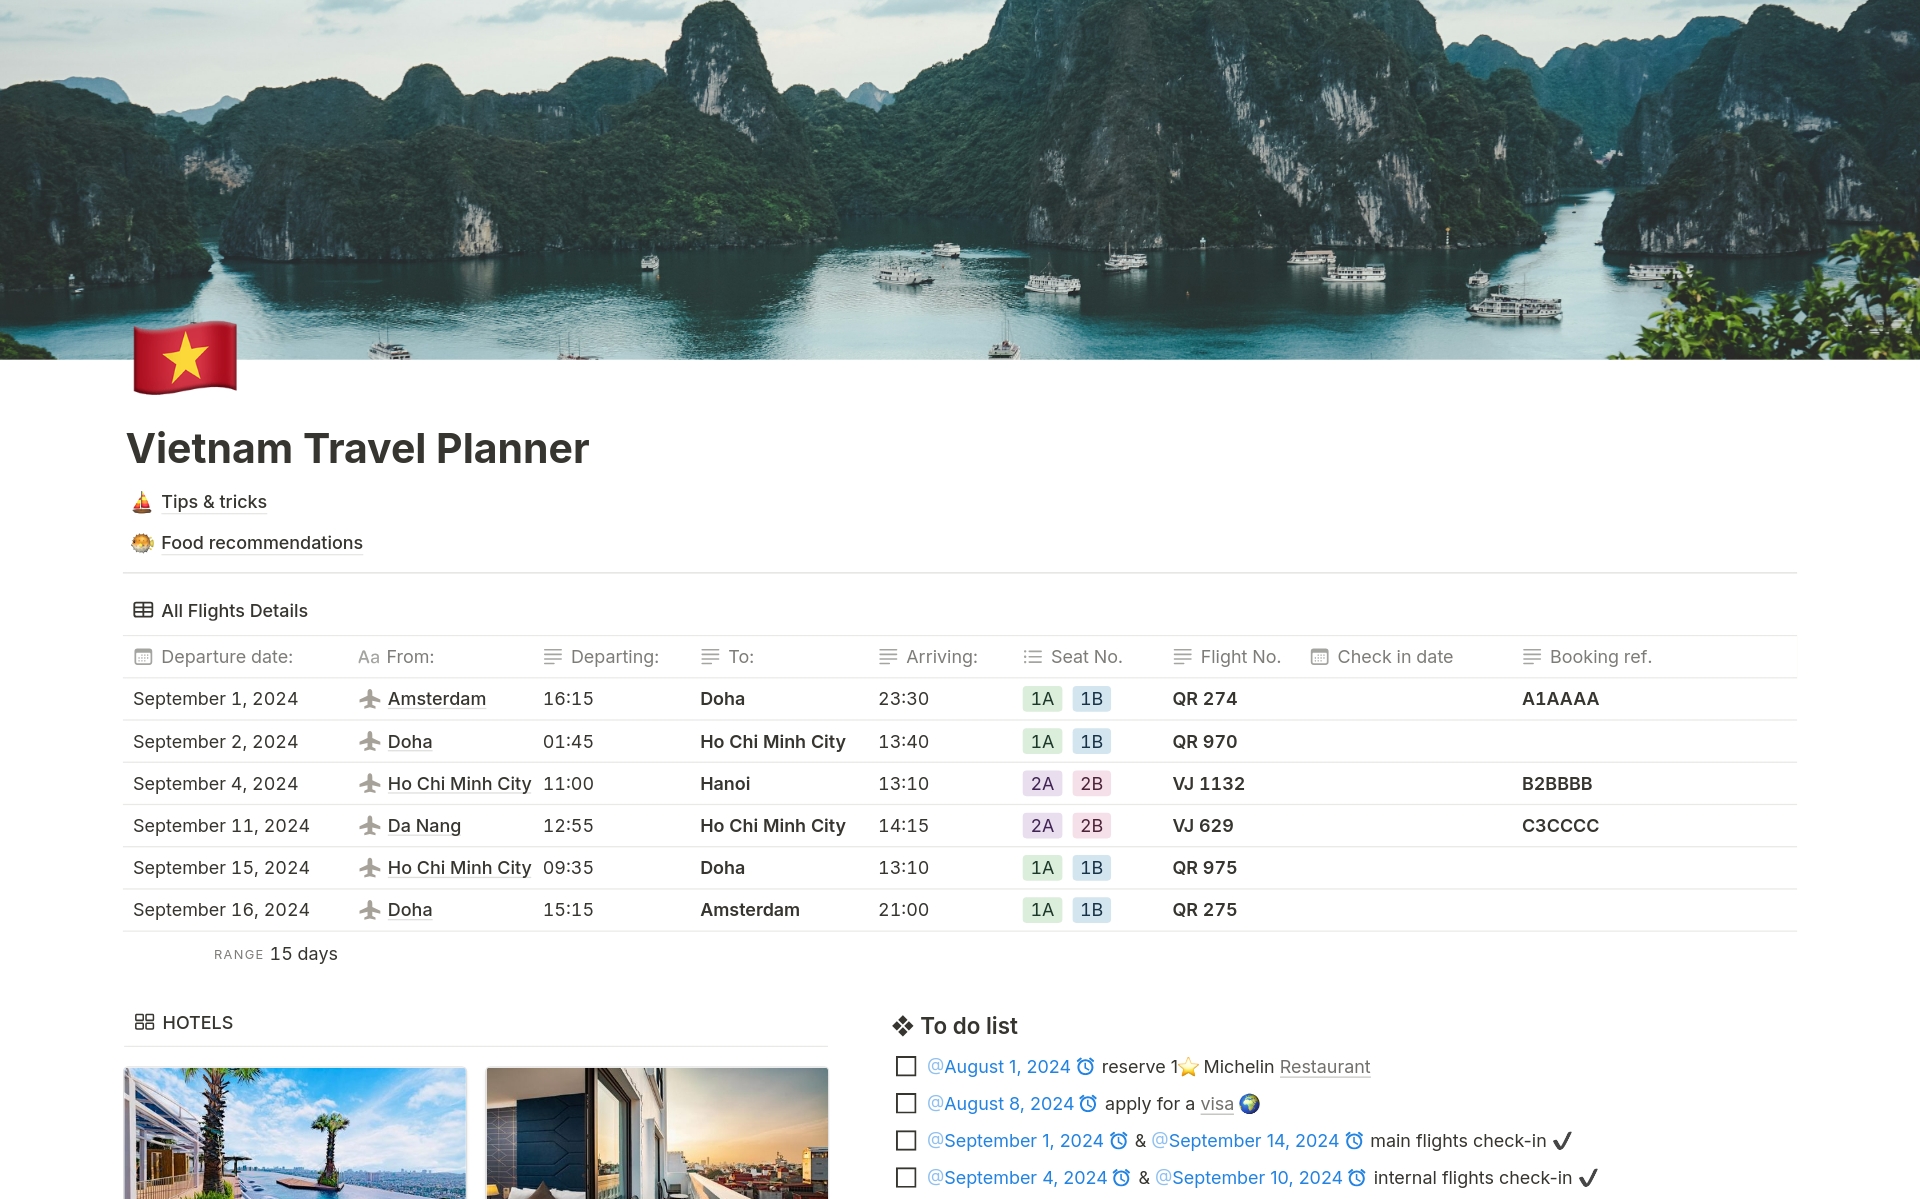 Discover the perfect minimalist travel planner! This template features essential tools for planning your trip to Vietnam (or anywhere, reall): tips, shopping & to-do lists, check-in reminders, and a customizable Kanban board for your travel plans. Simple, practical, and fuss-free